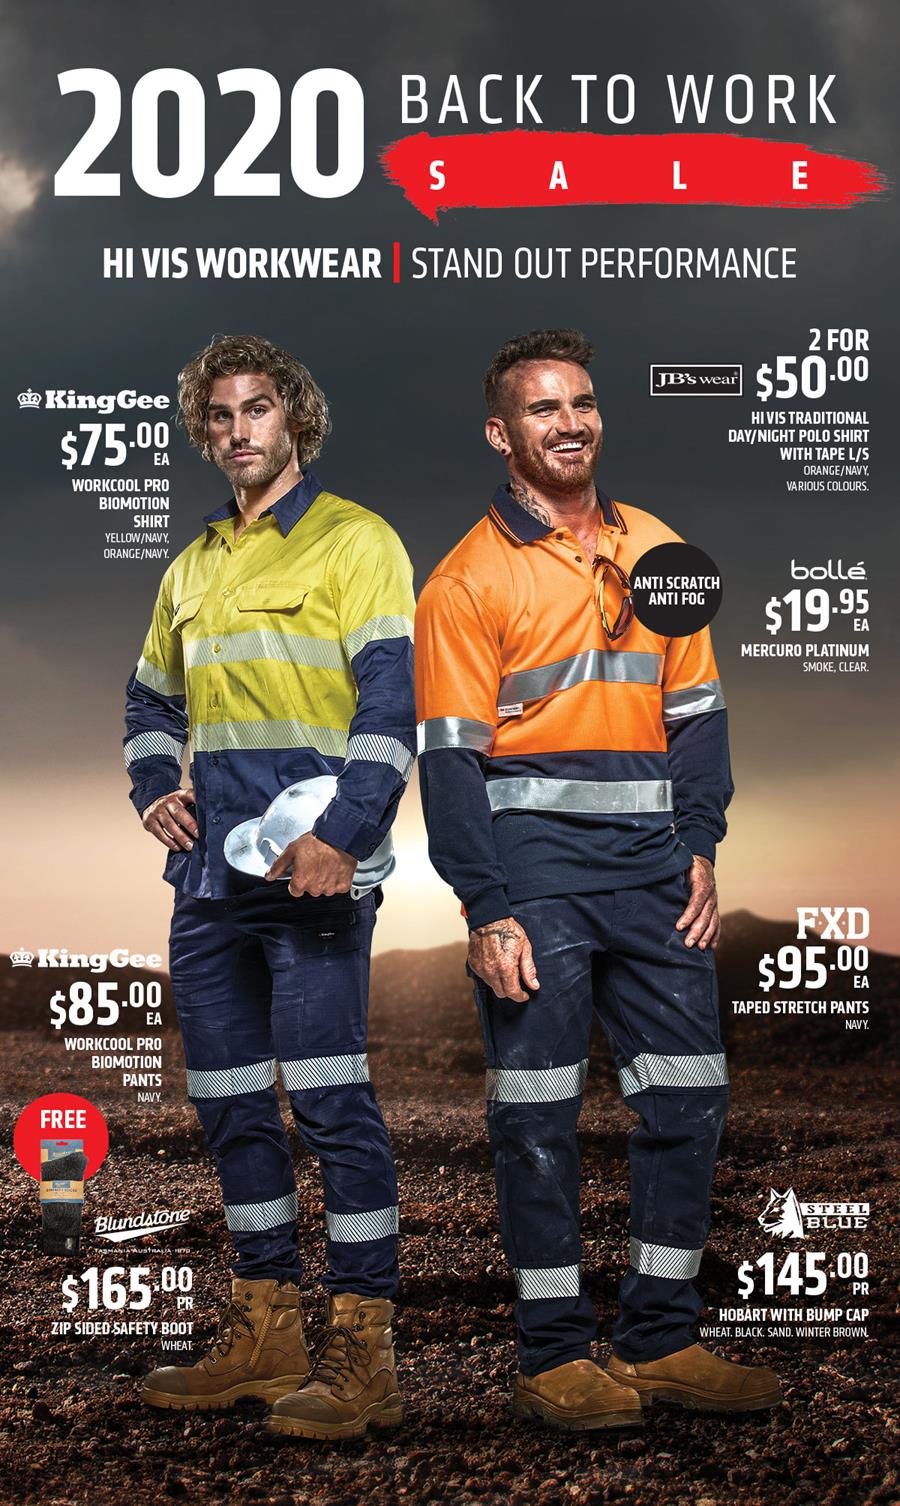 Hi Vis Workwear | Stand Out Performance